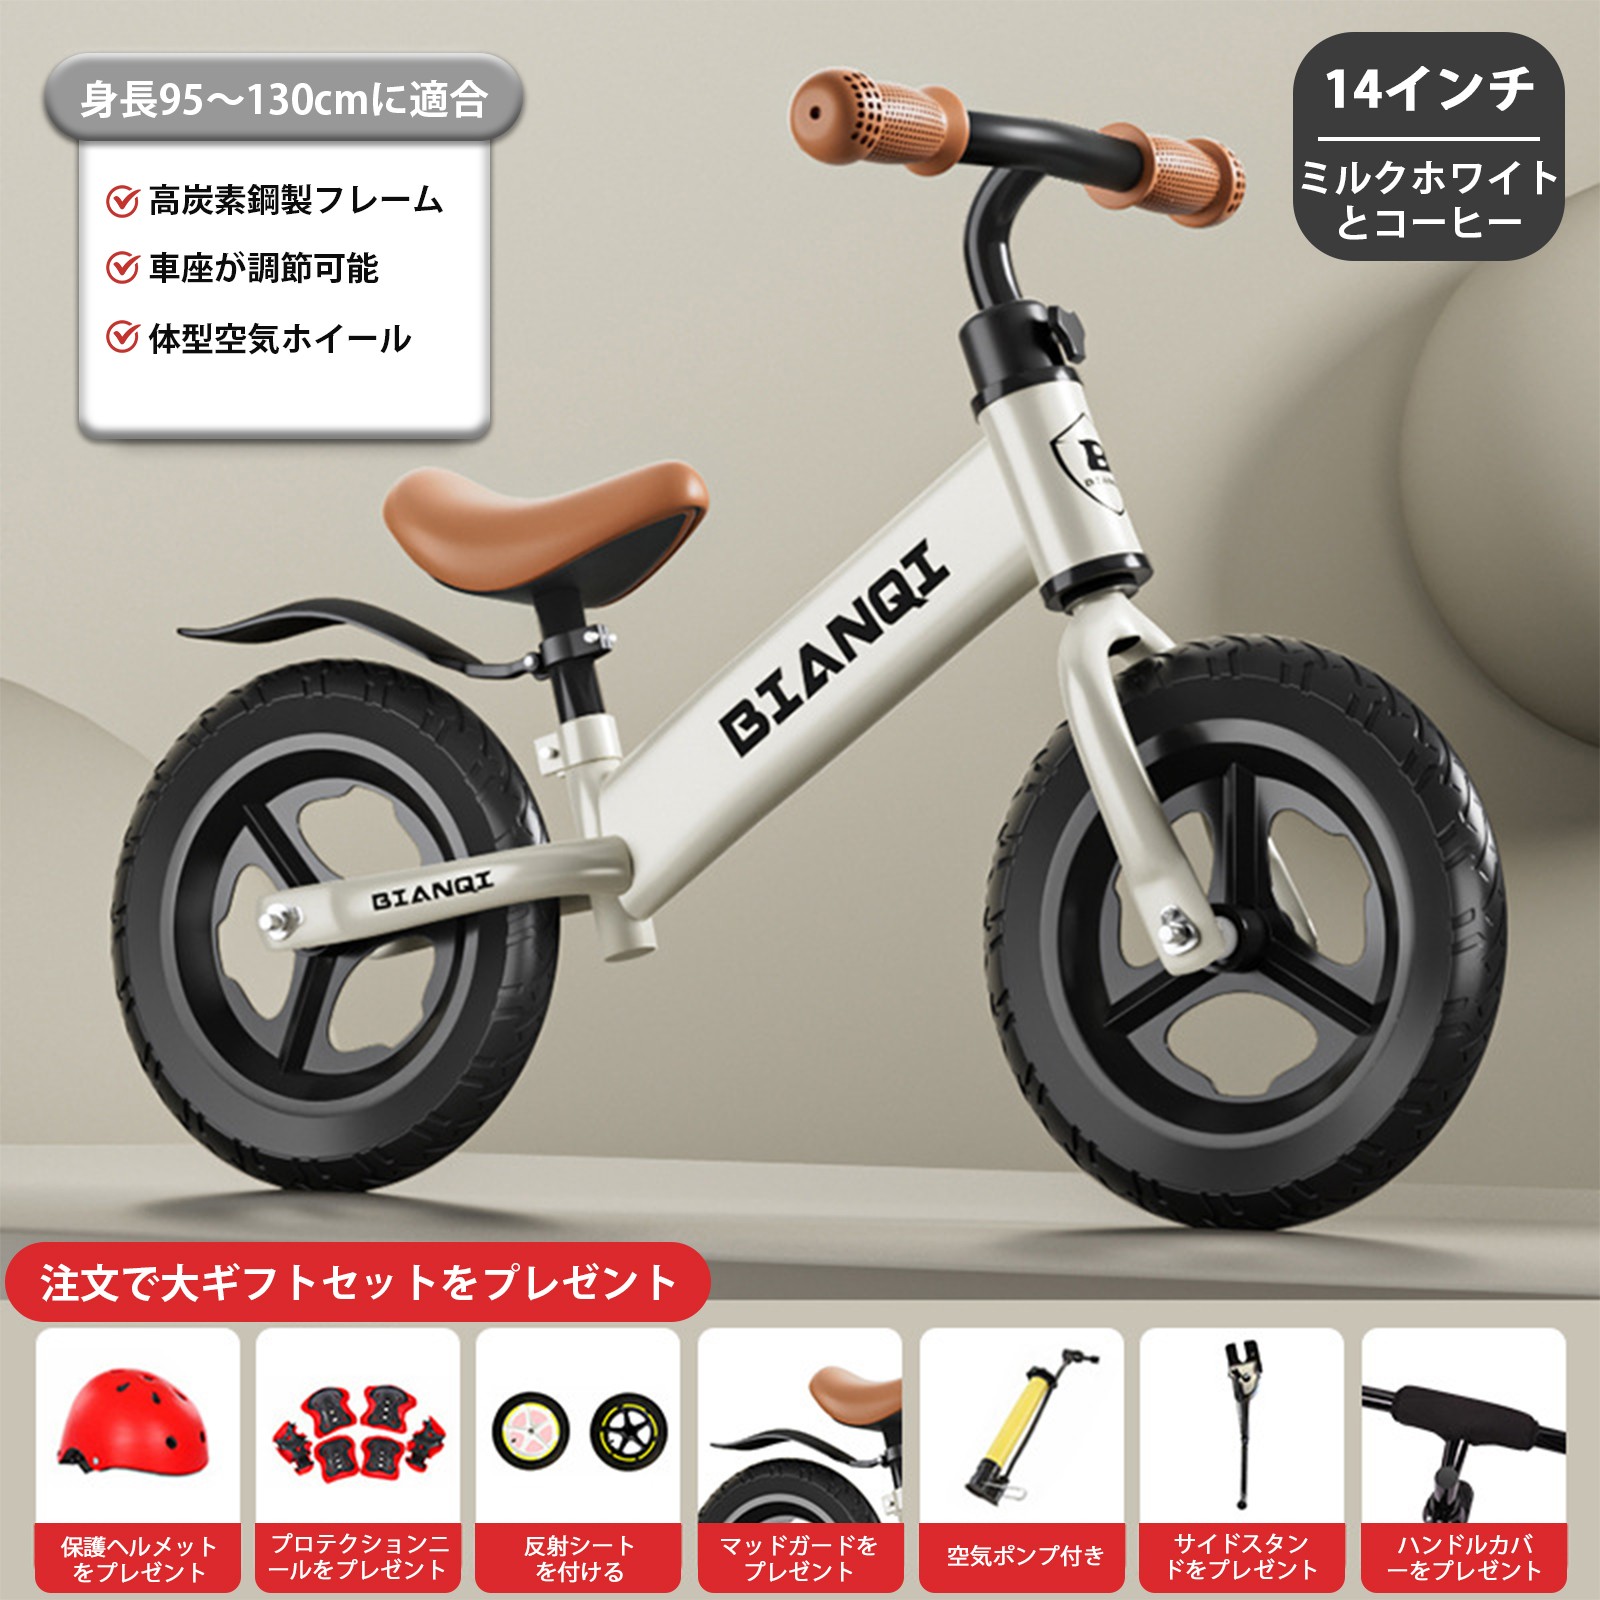 K14 white integrated inflatable wheel